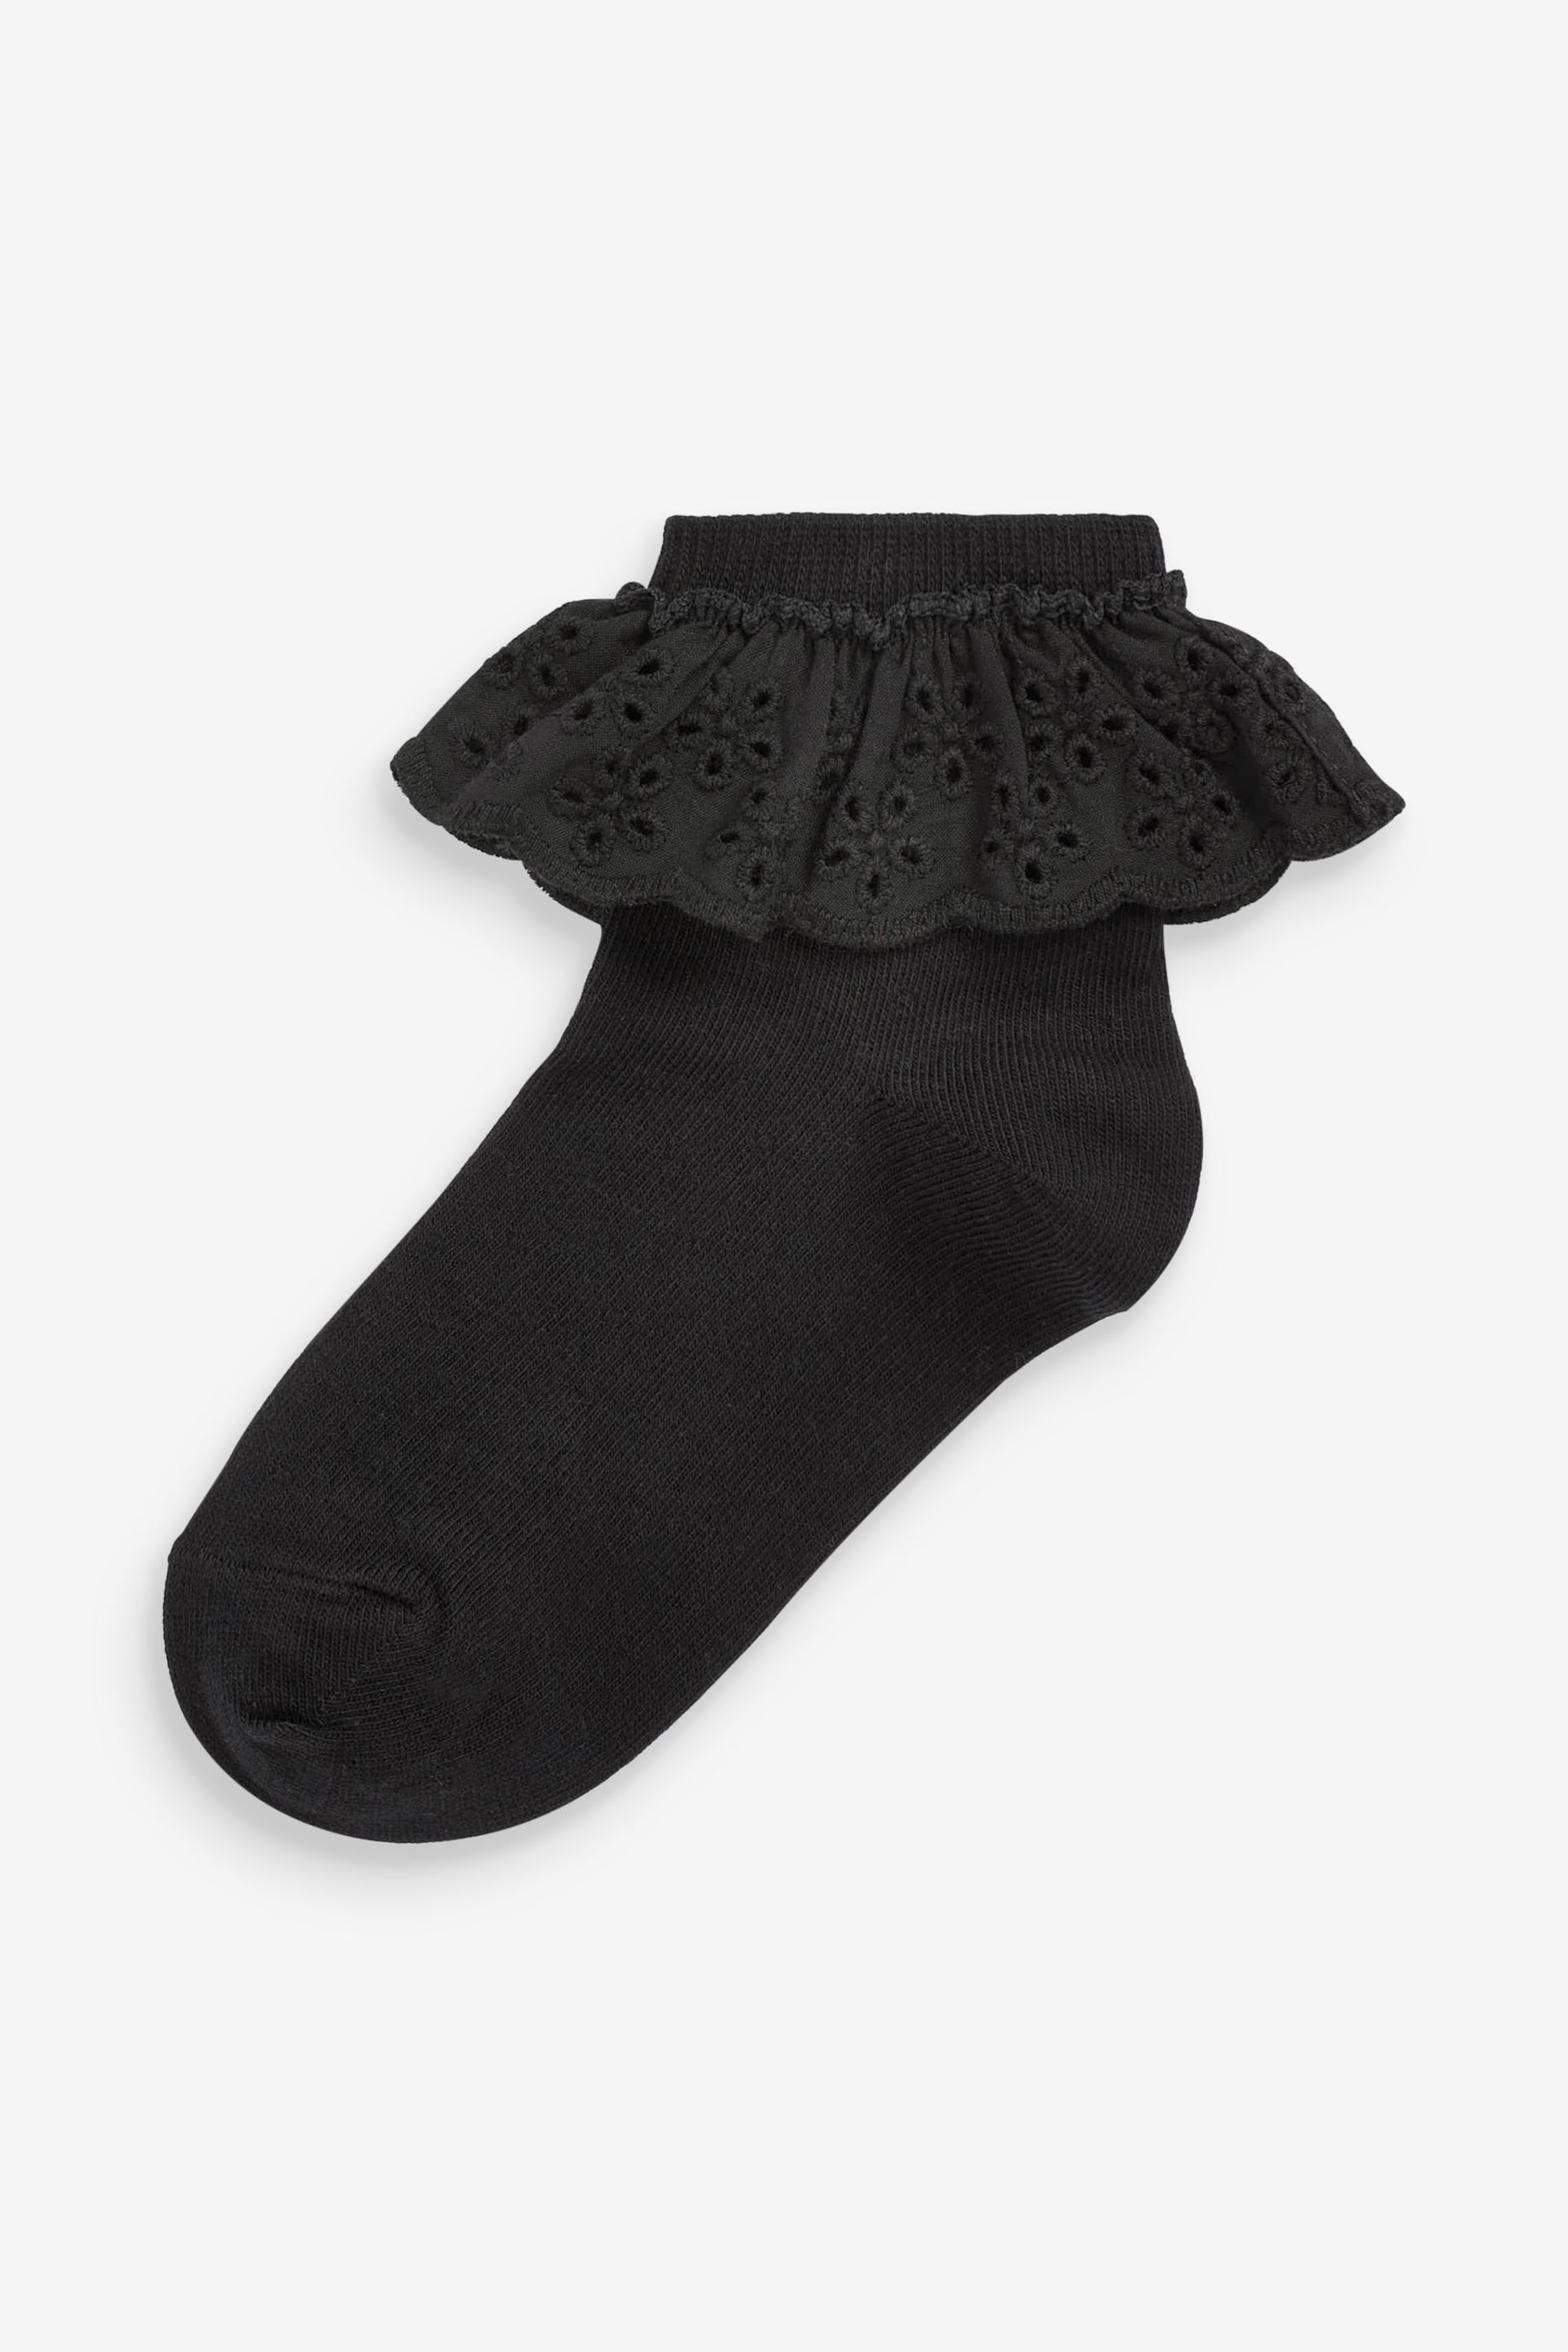 Black Cotton Rich Ruffle Ankle Socks 2 Pack - Image 2 of 3